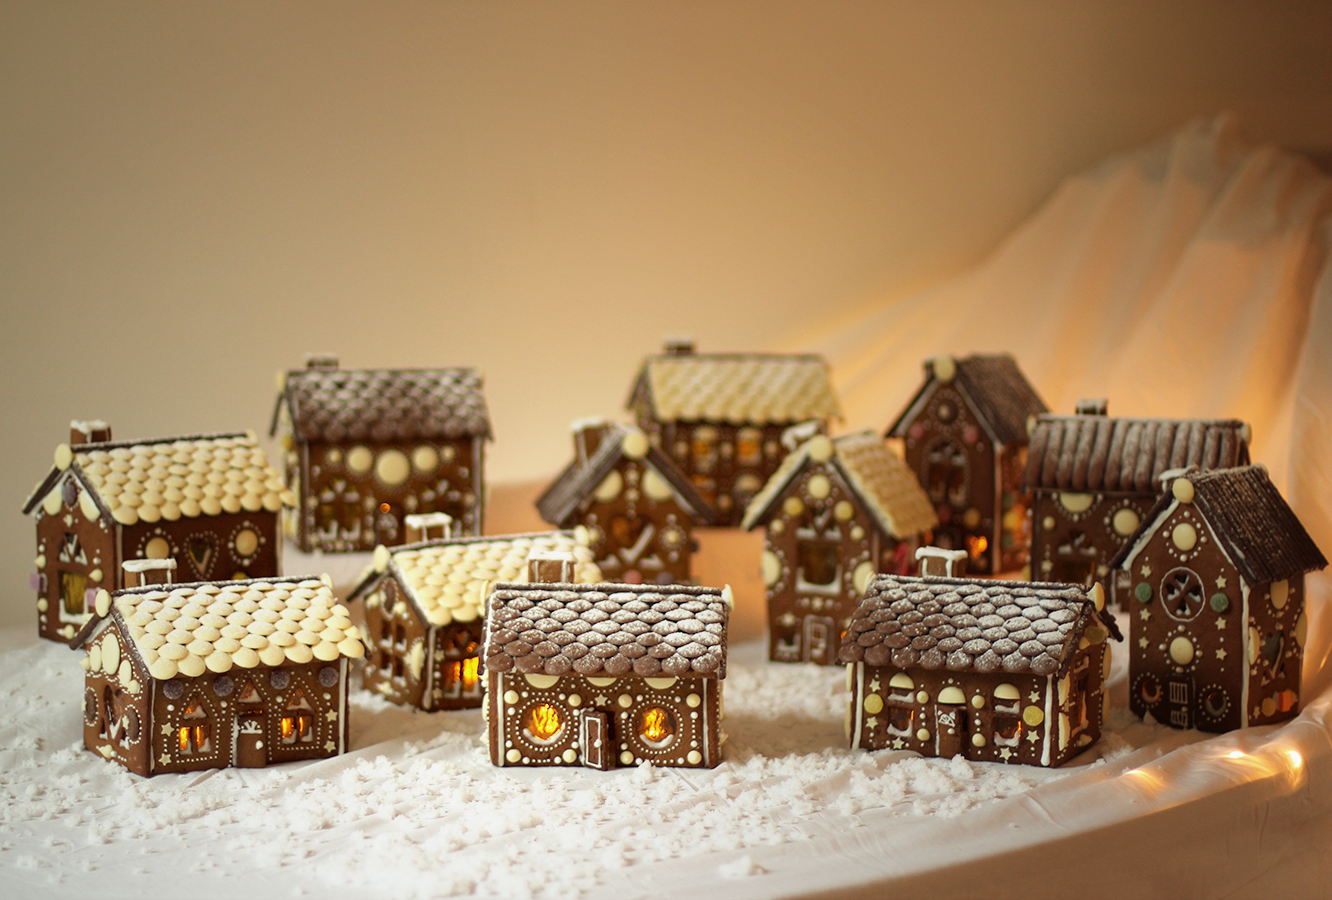 gingerbread-house-village-recipe-guide-21